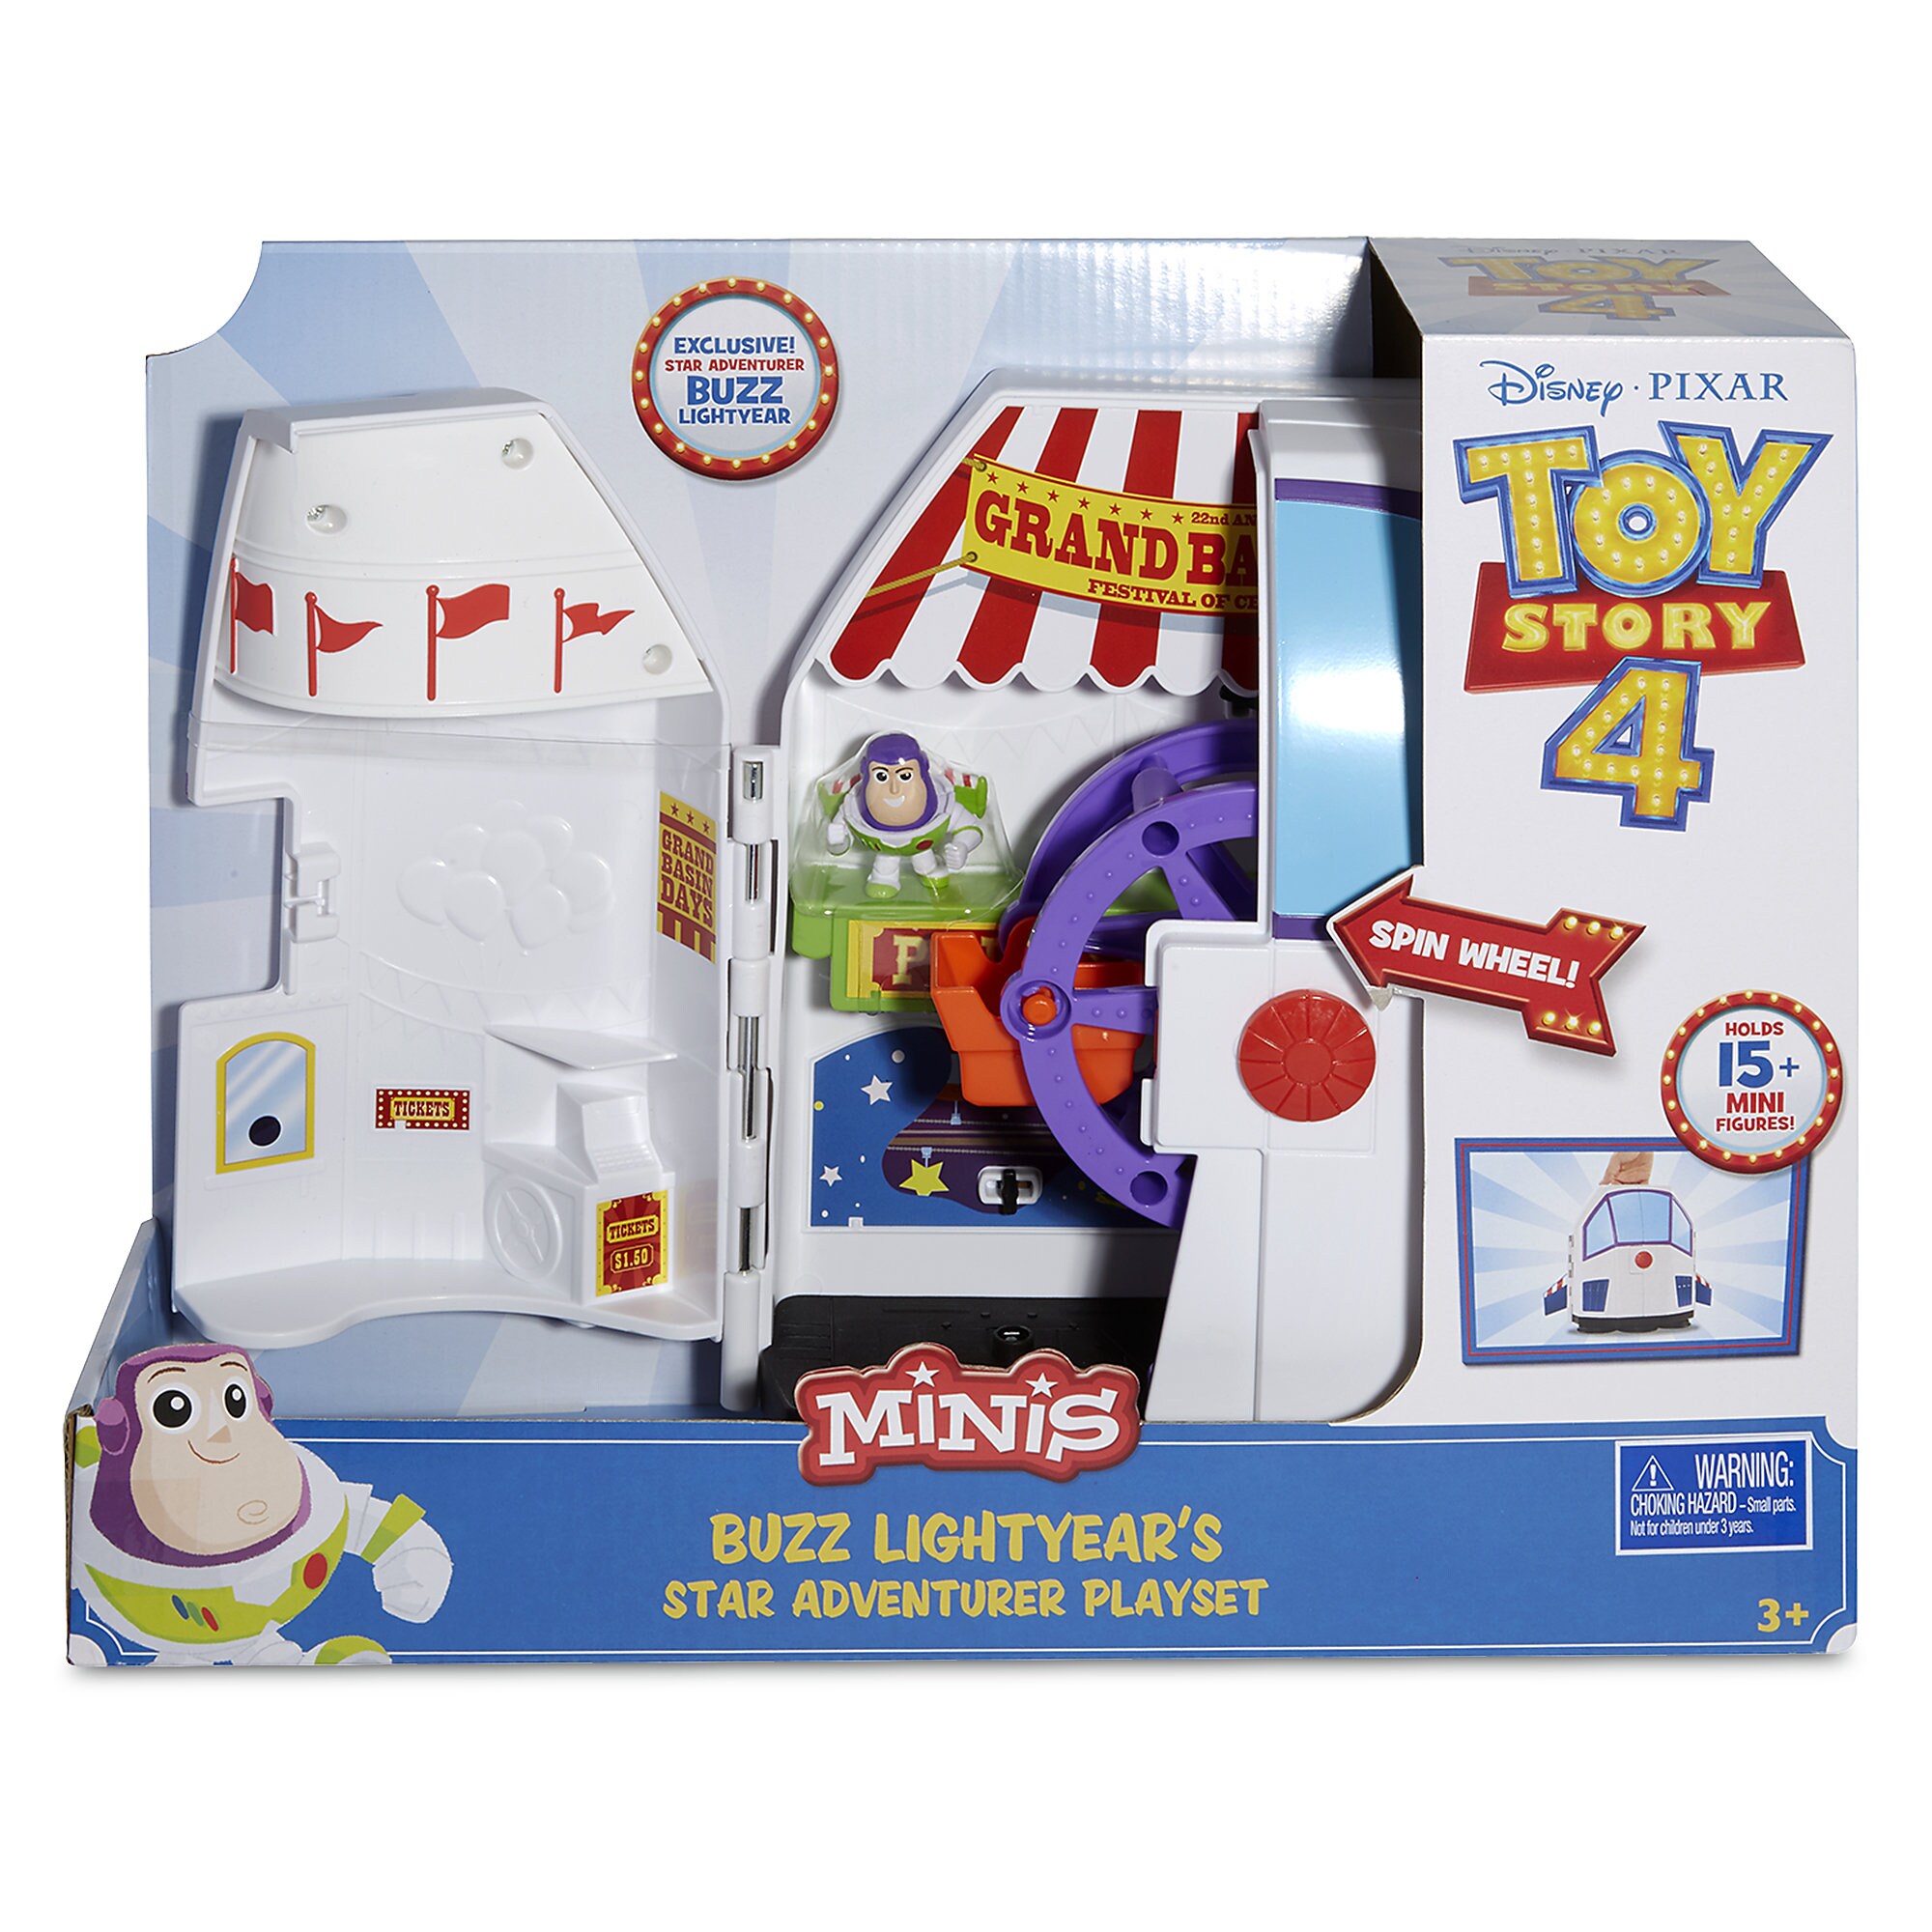 Buzz Lightyear Star Adventure Play Set – Toy Story 4 released today